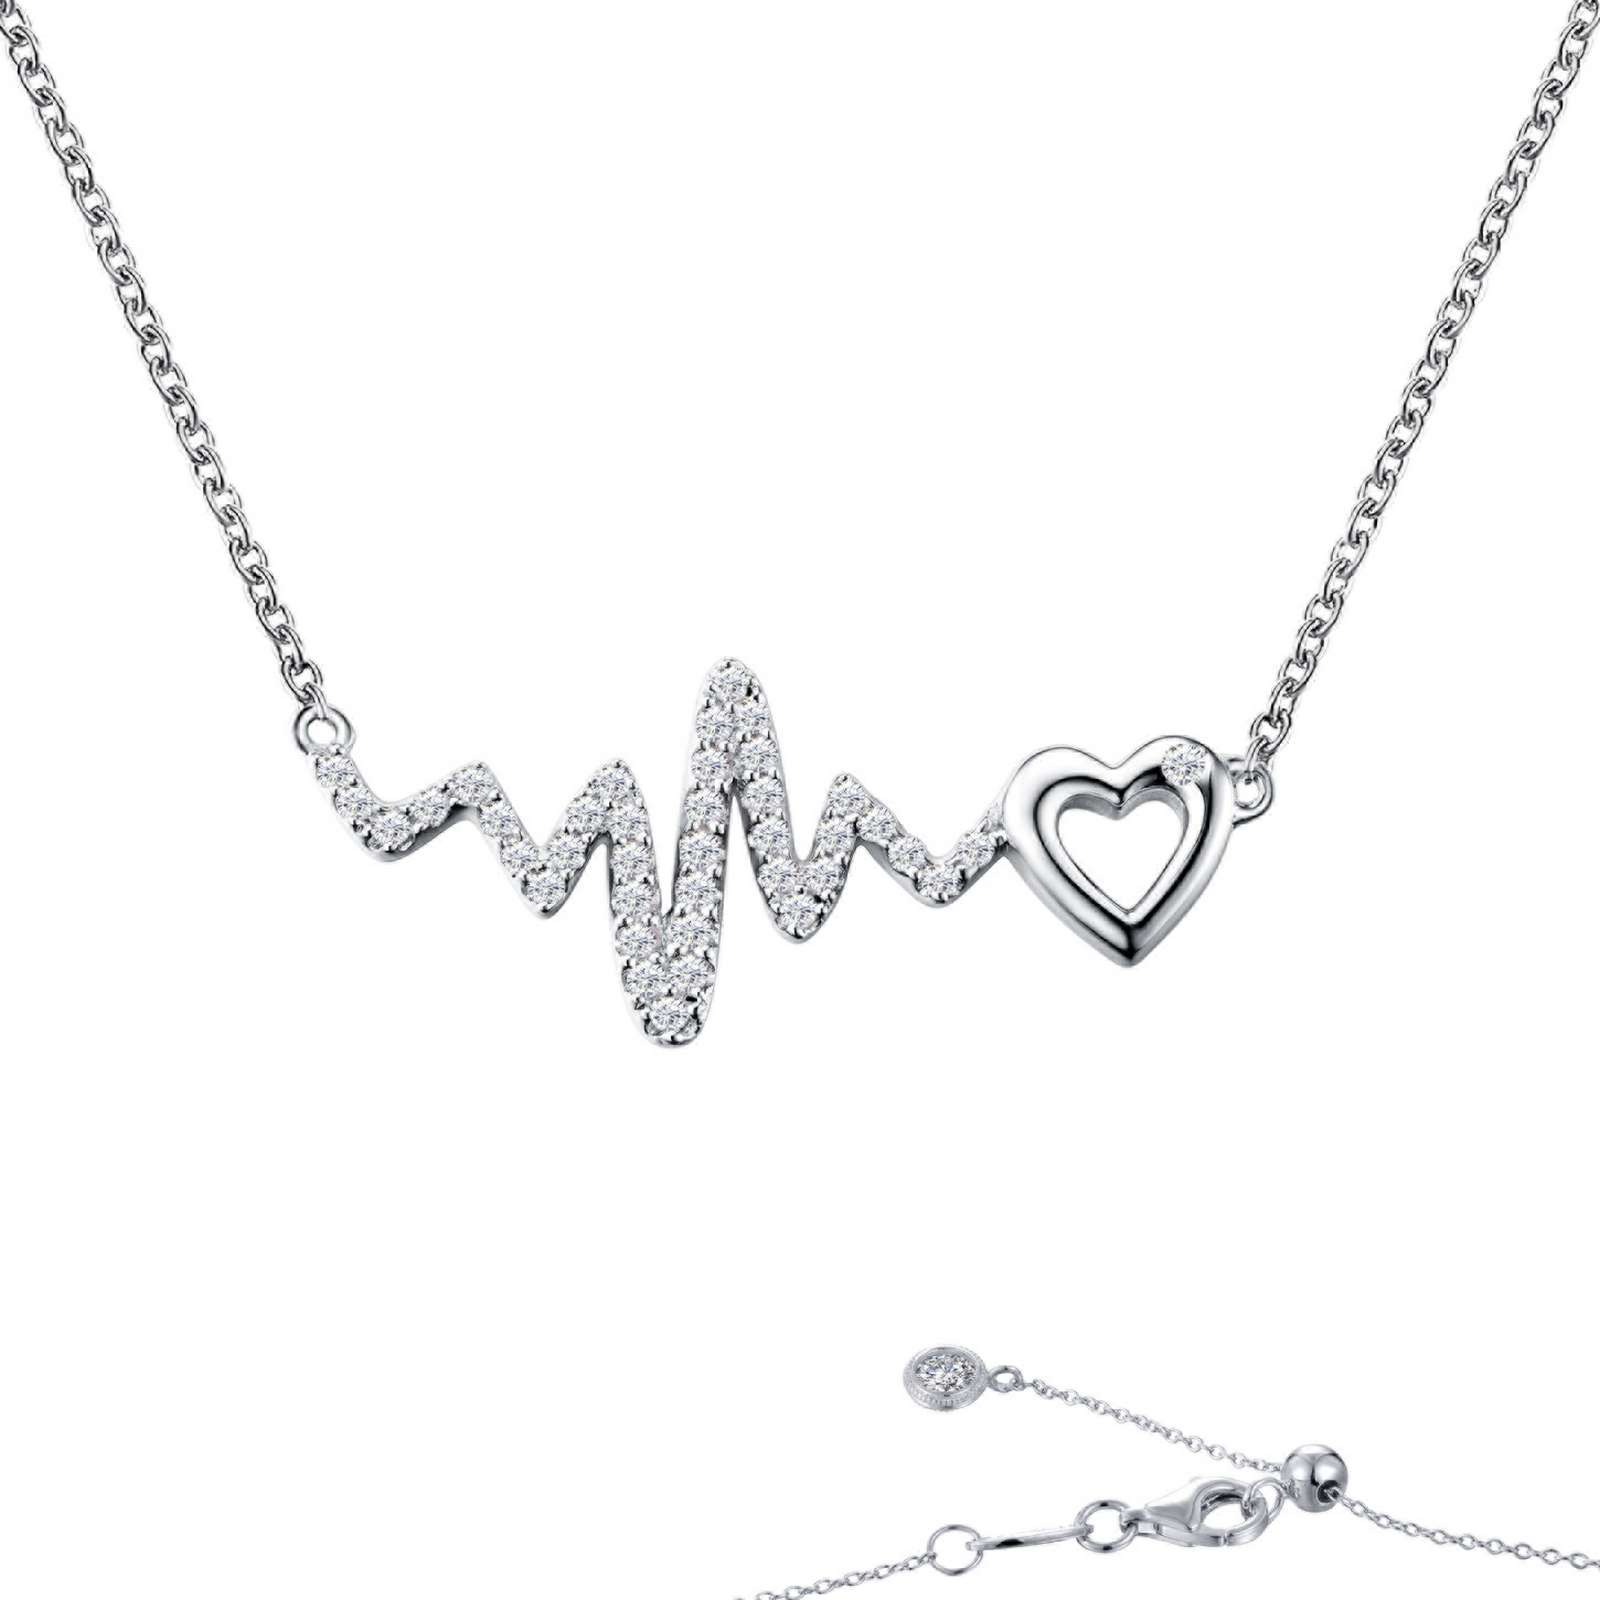 Heart & Heartbeat Necklace Griner Jewelry Co. Moultrie, GA